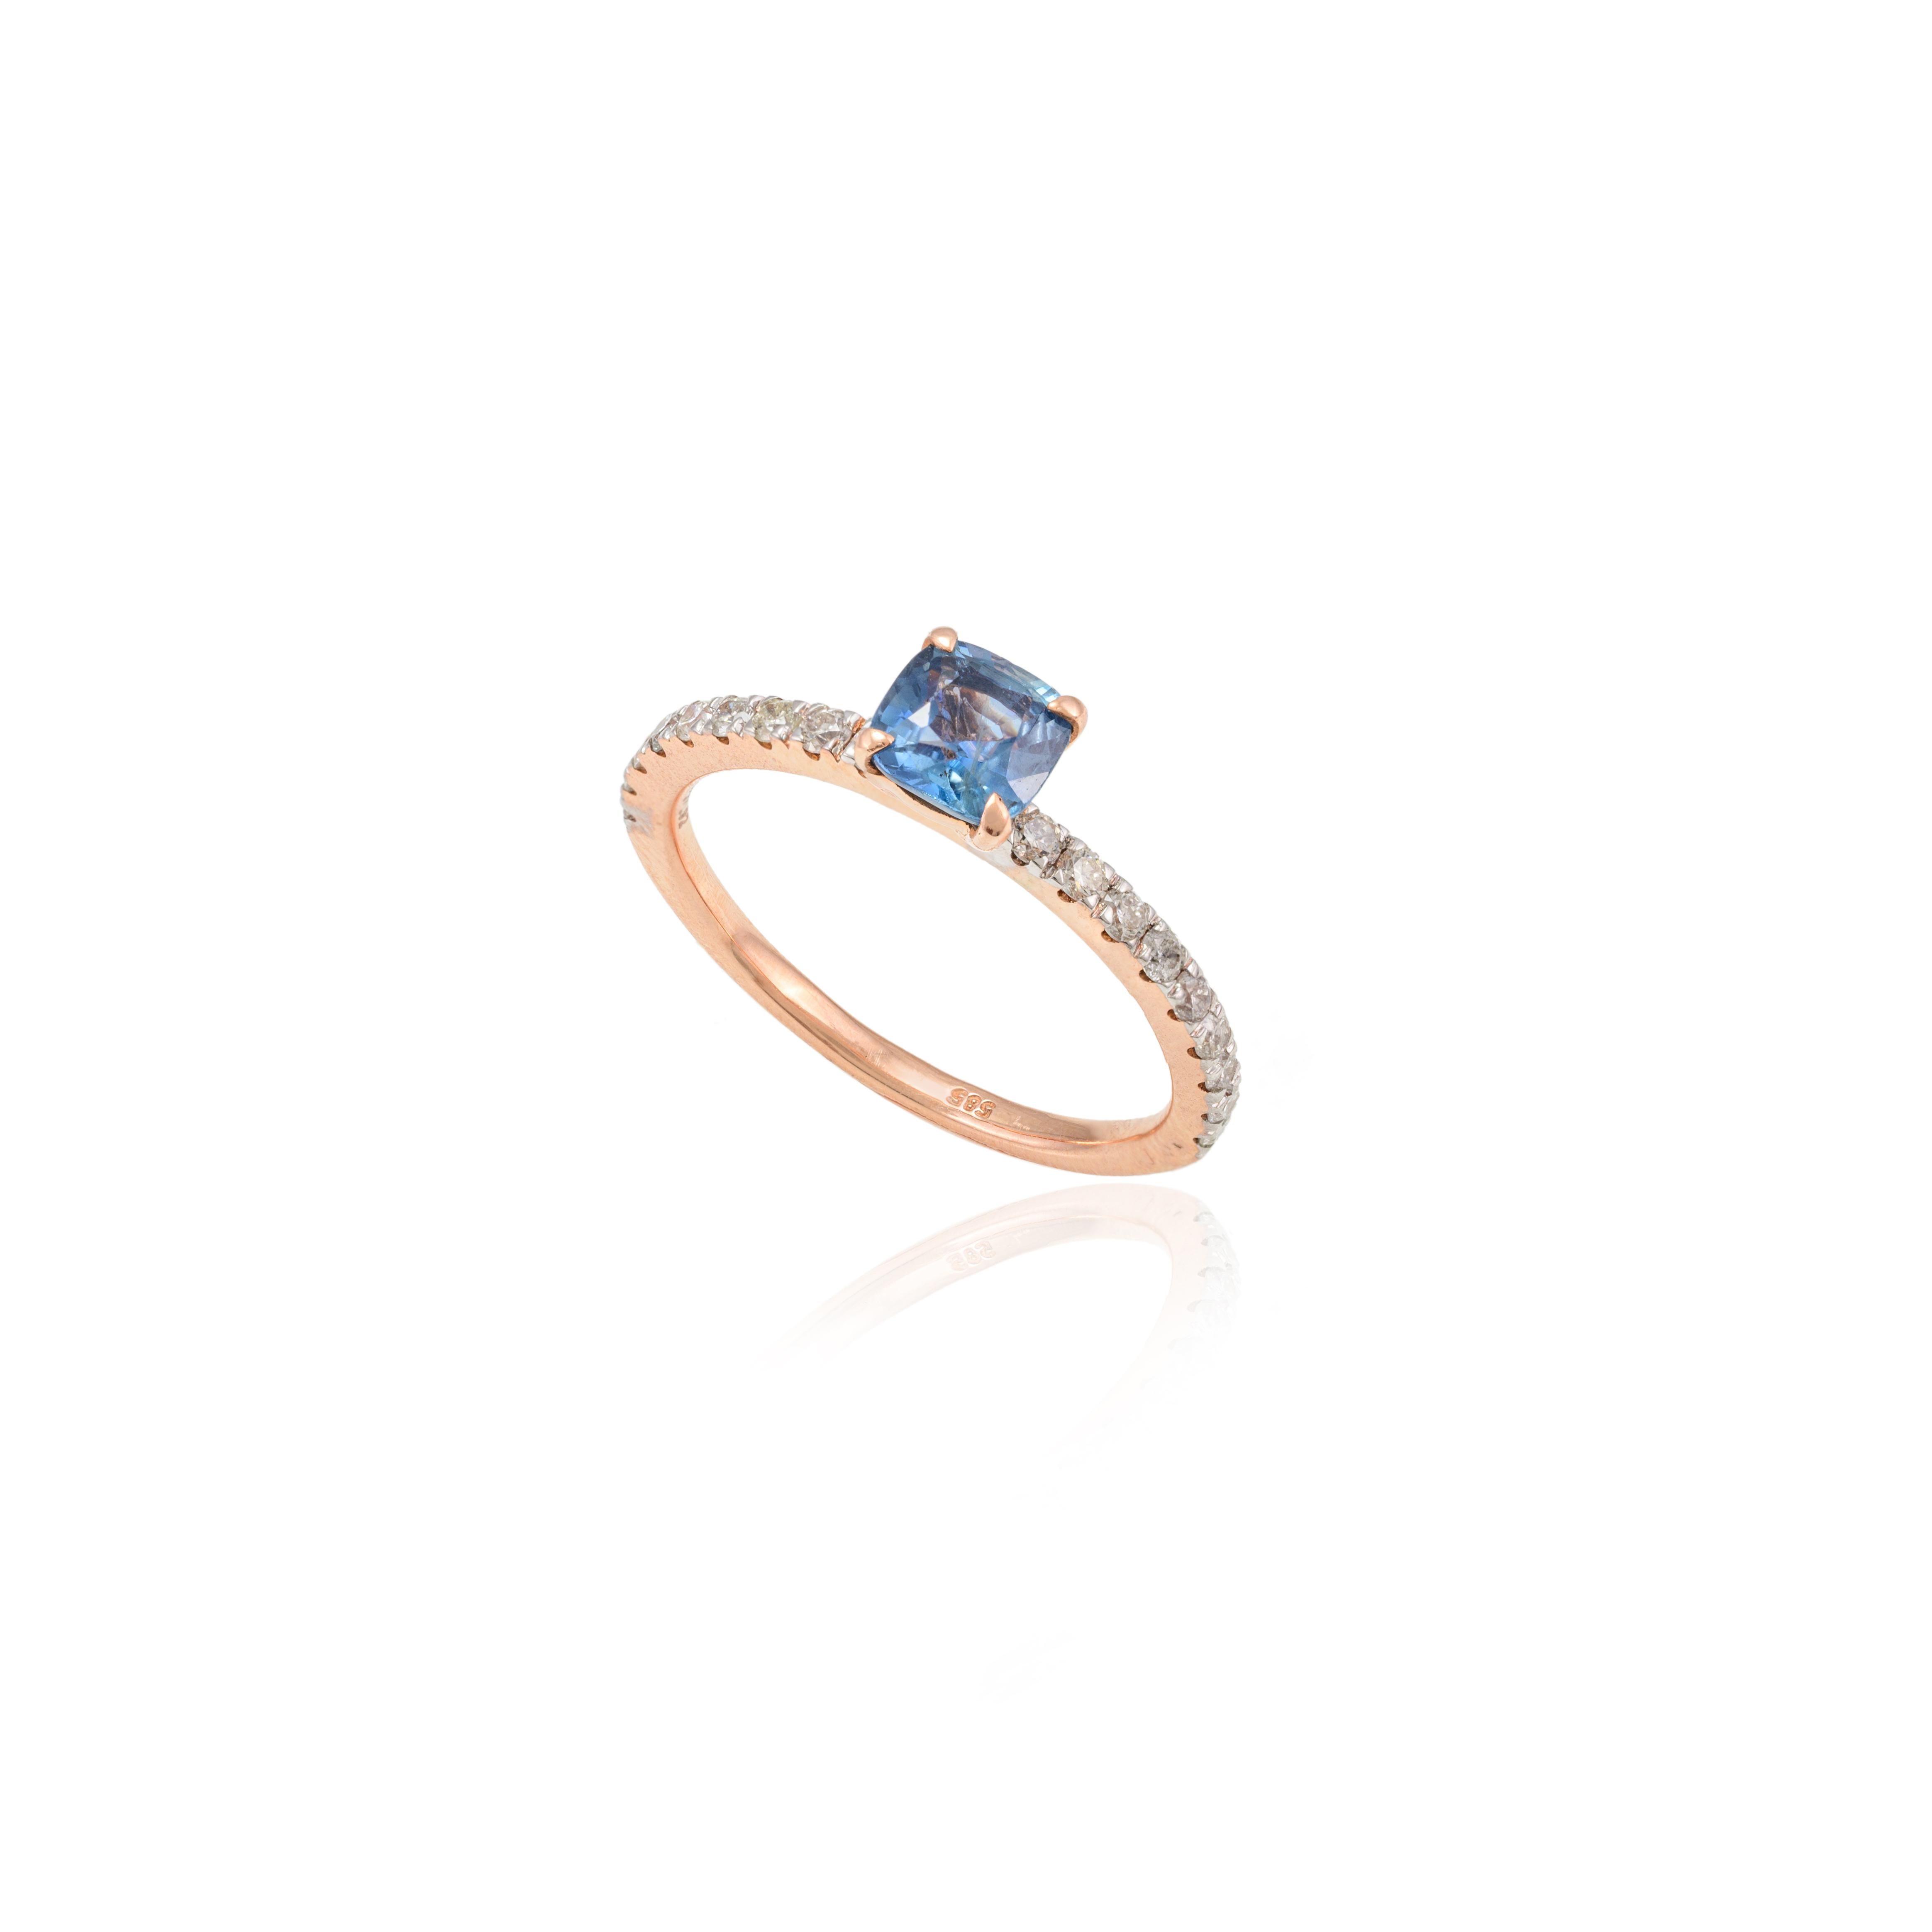 For Sale:  14k Solid Rose Gold Diamond and Cushion Cut Blue Sapphire Ring 3